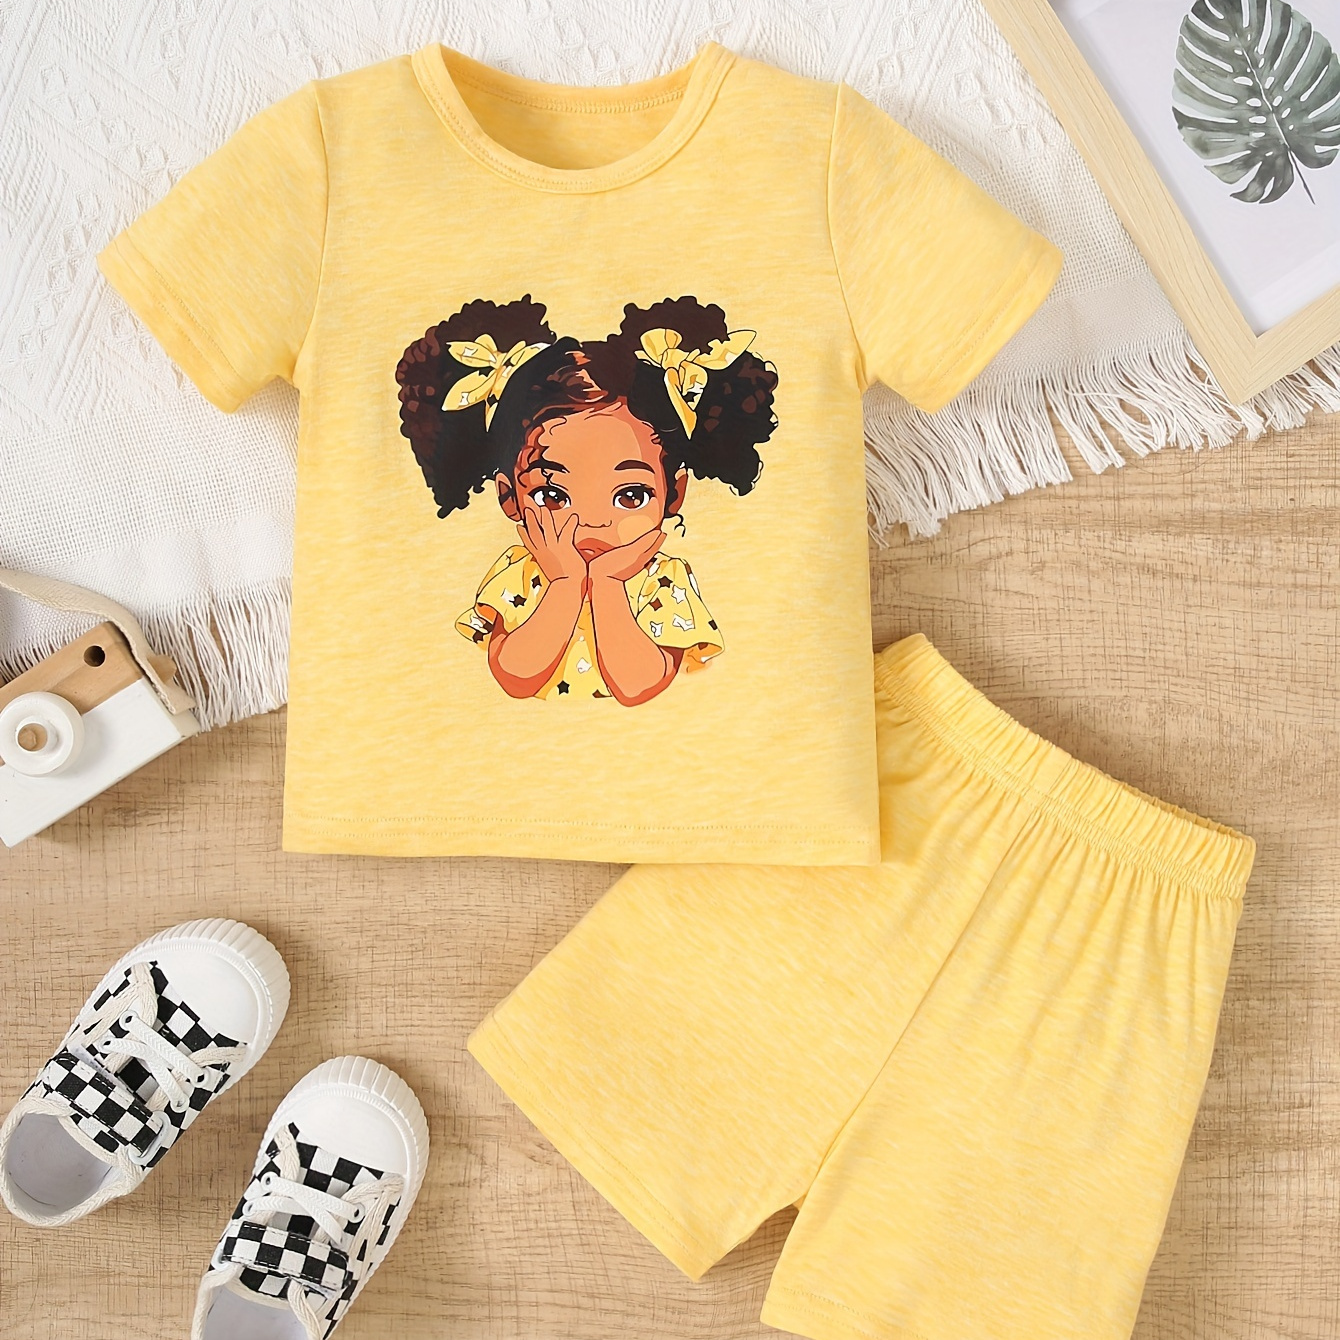 

Baby's Lovely Cartoon Girl Portrait Print 2pcs Summer Outfit, Casual T-shirt & Solid Color Shorts Set, Toddler & Infant Girl's Clothes For Daily/holiday, As Gift